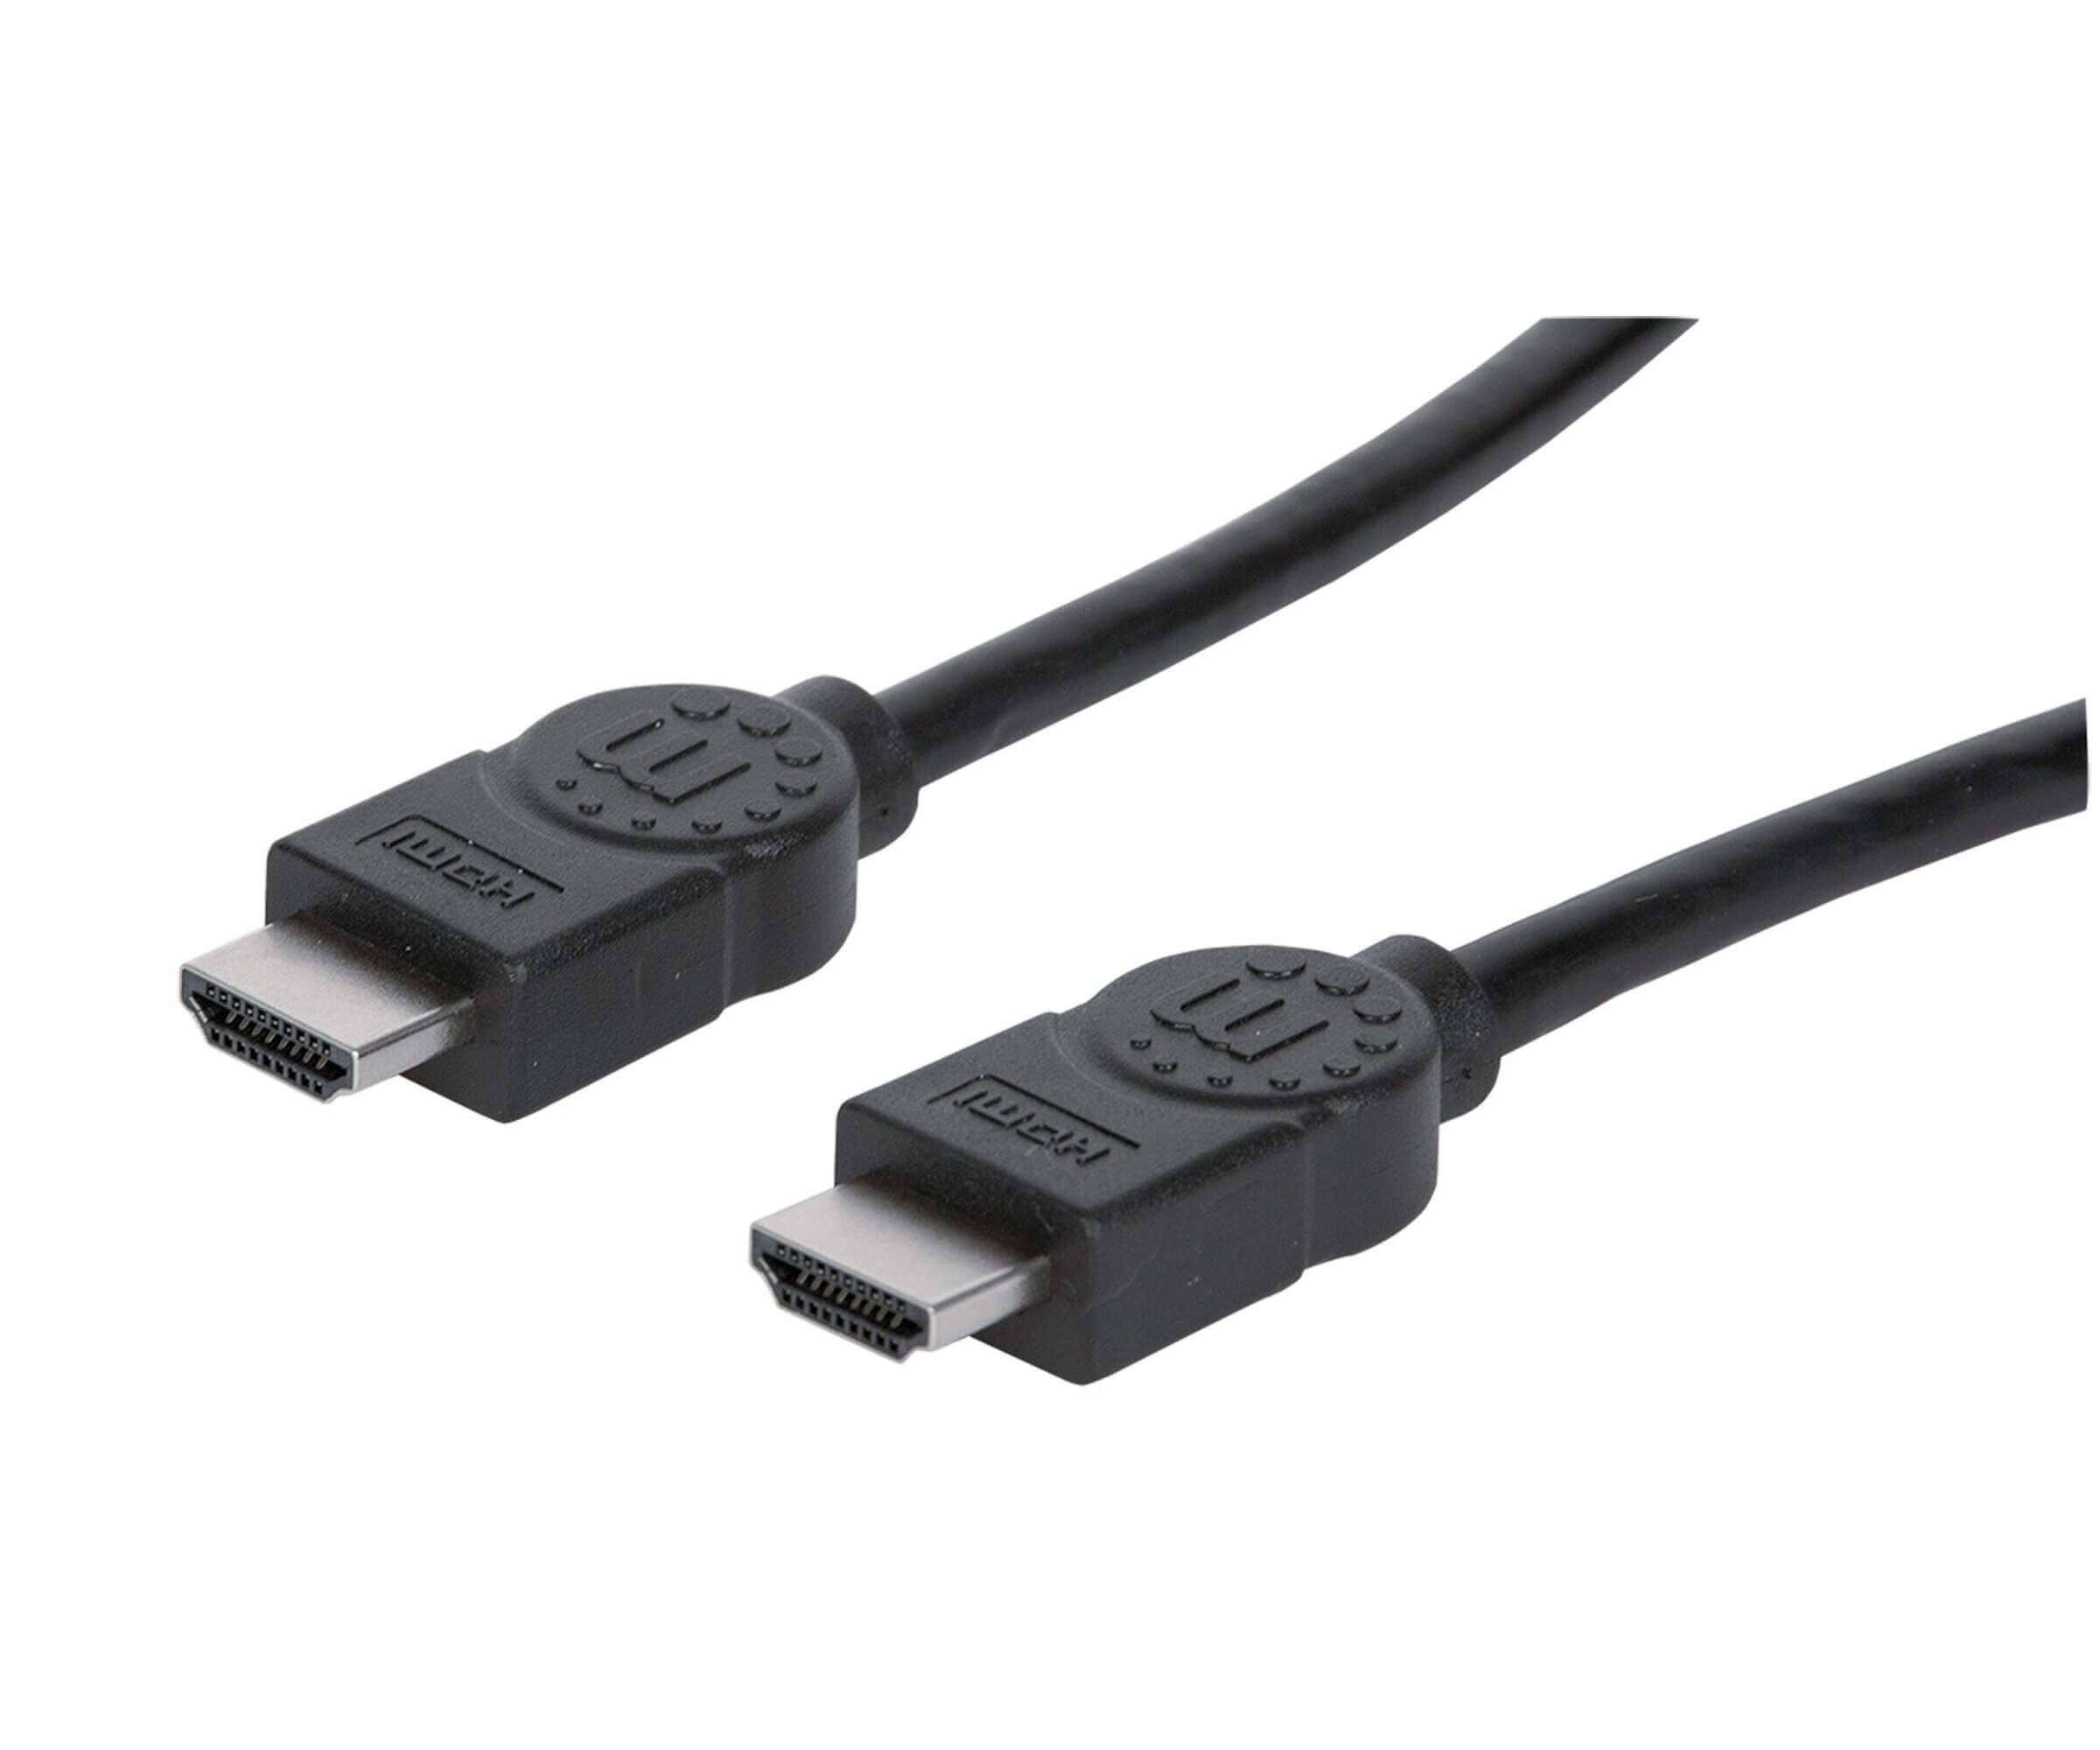  Manhattan High Speed HDMI Cable with Ethernet Channel (2m)